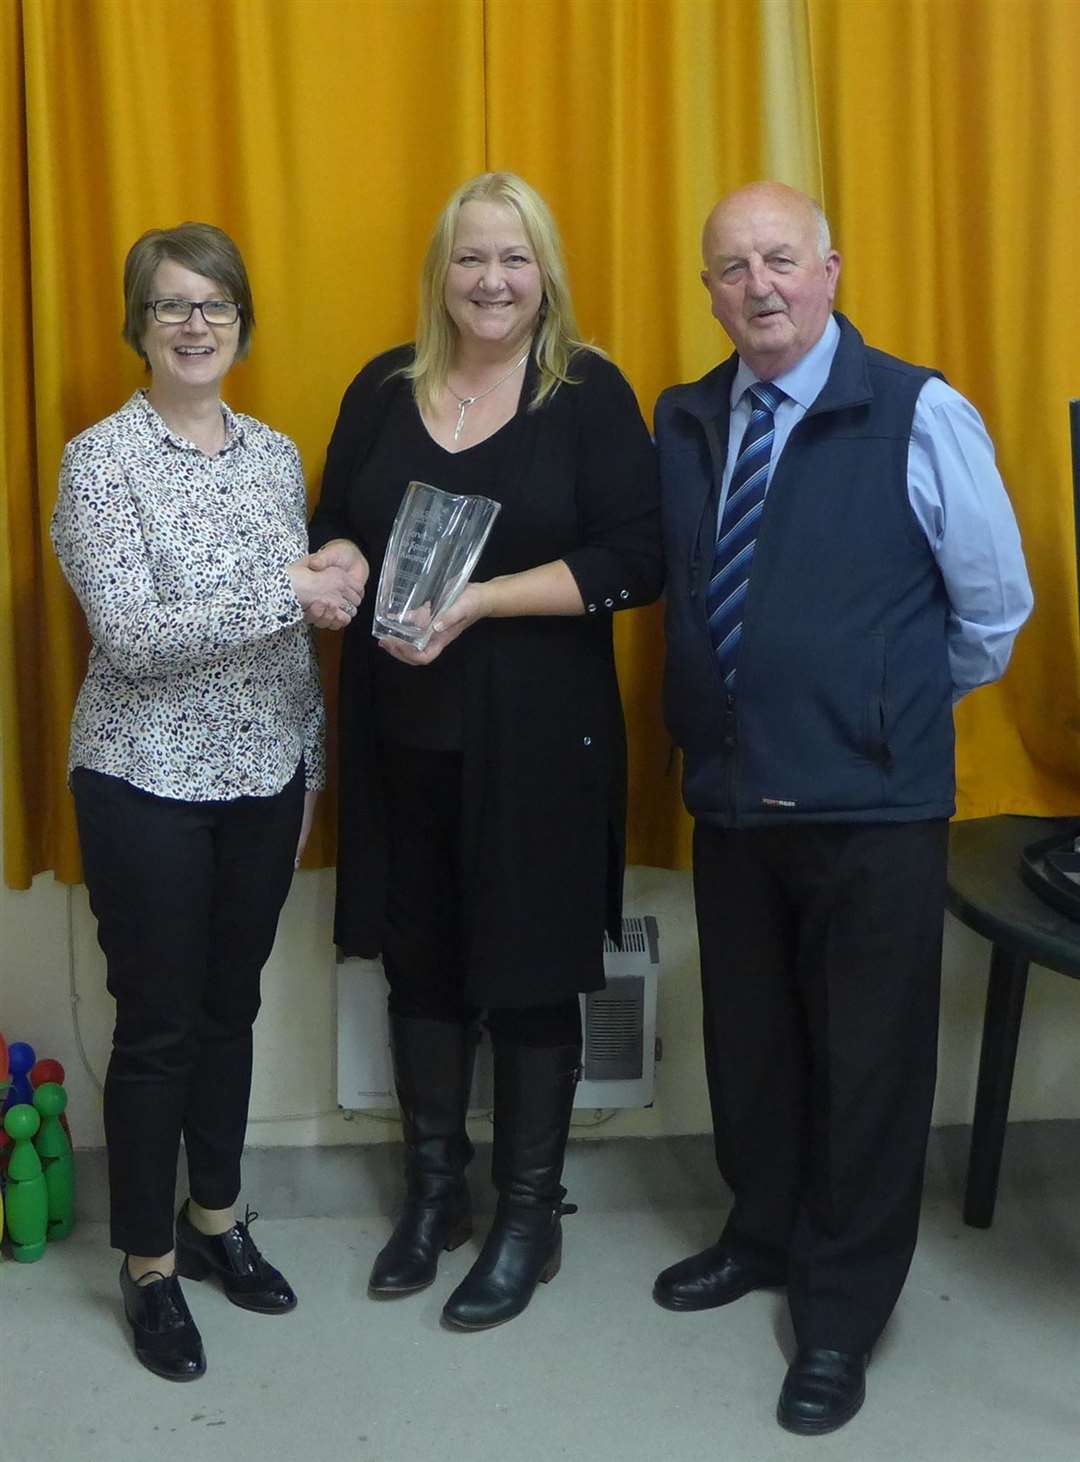 Claire McIntosh (centre) receives the Scottish Association of Local Sports Councils' Service to Sport award from national development officer Gail Prince at the Pentland Firth Yacht Club in Scrabster. Looking on is Caithness Sports Council executive member and local Enable chairman Willie Mackay.